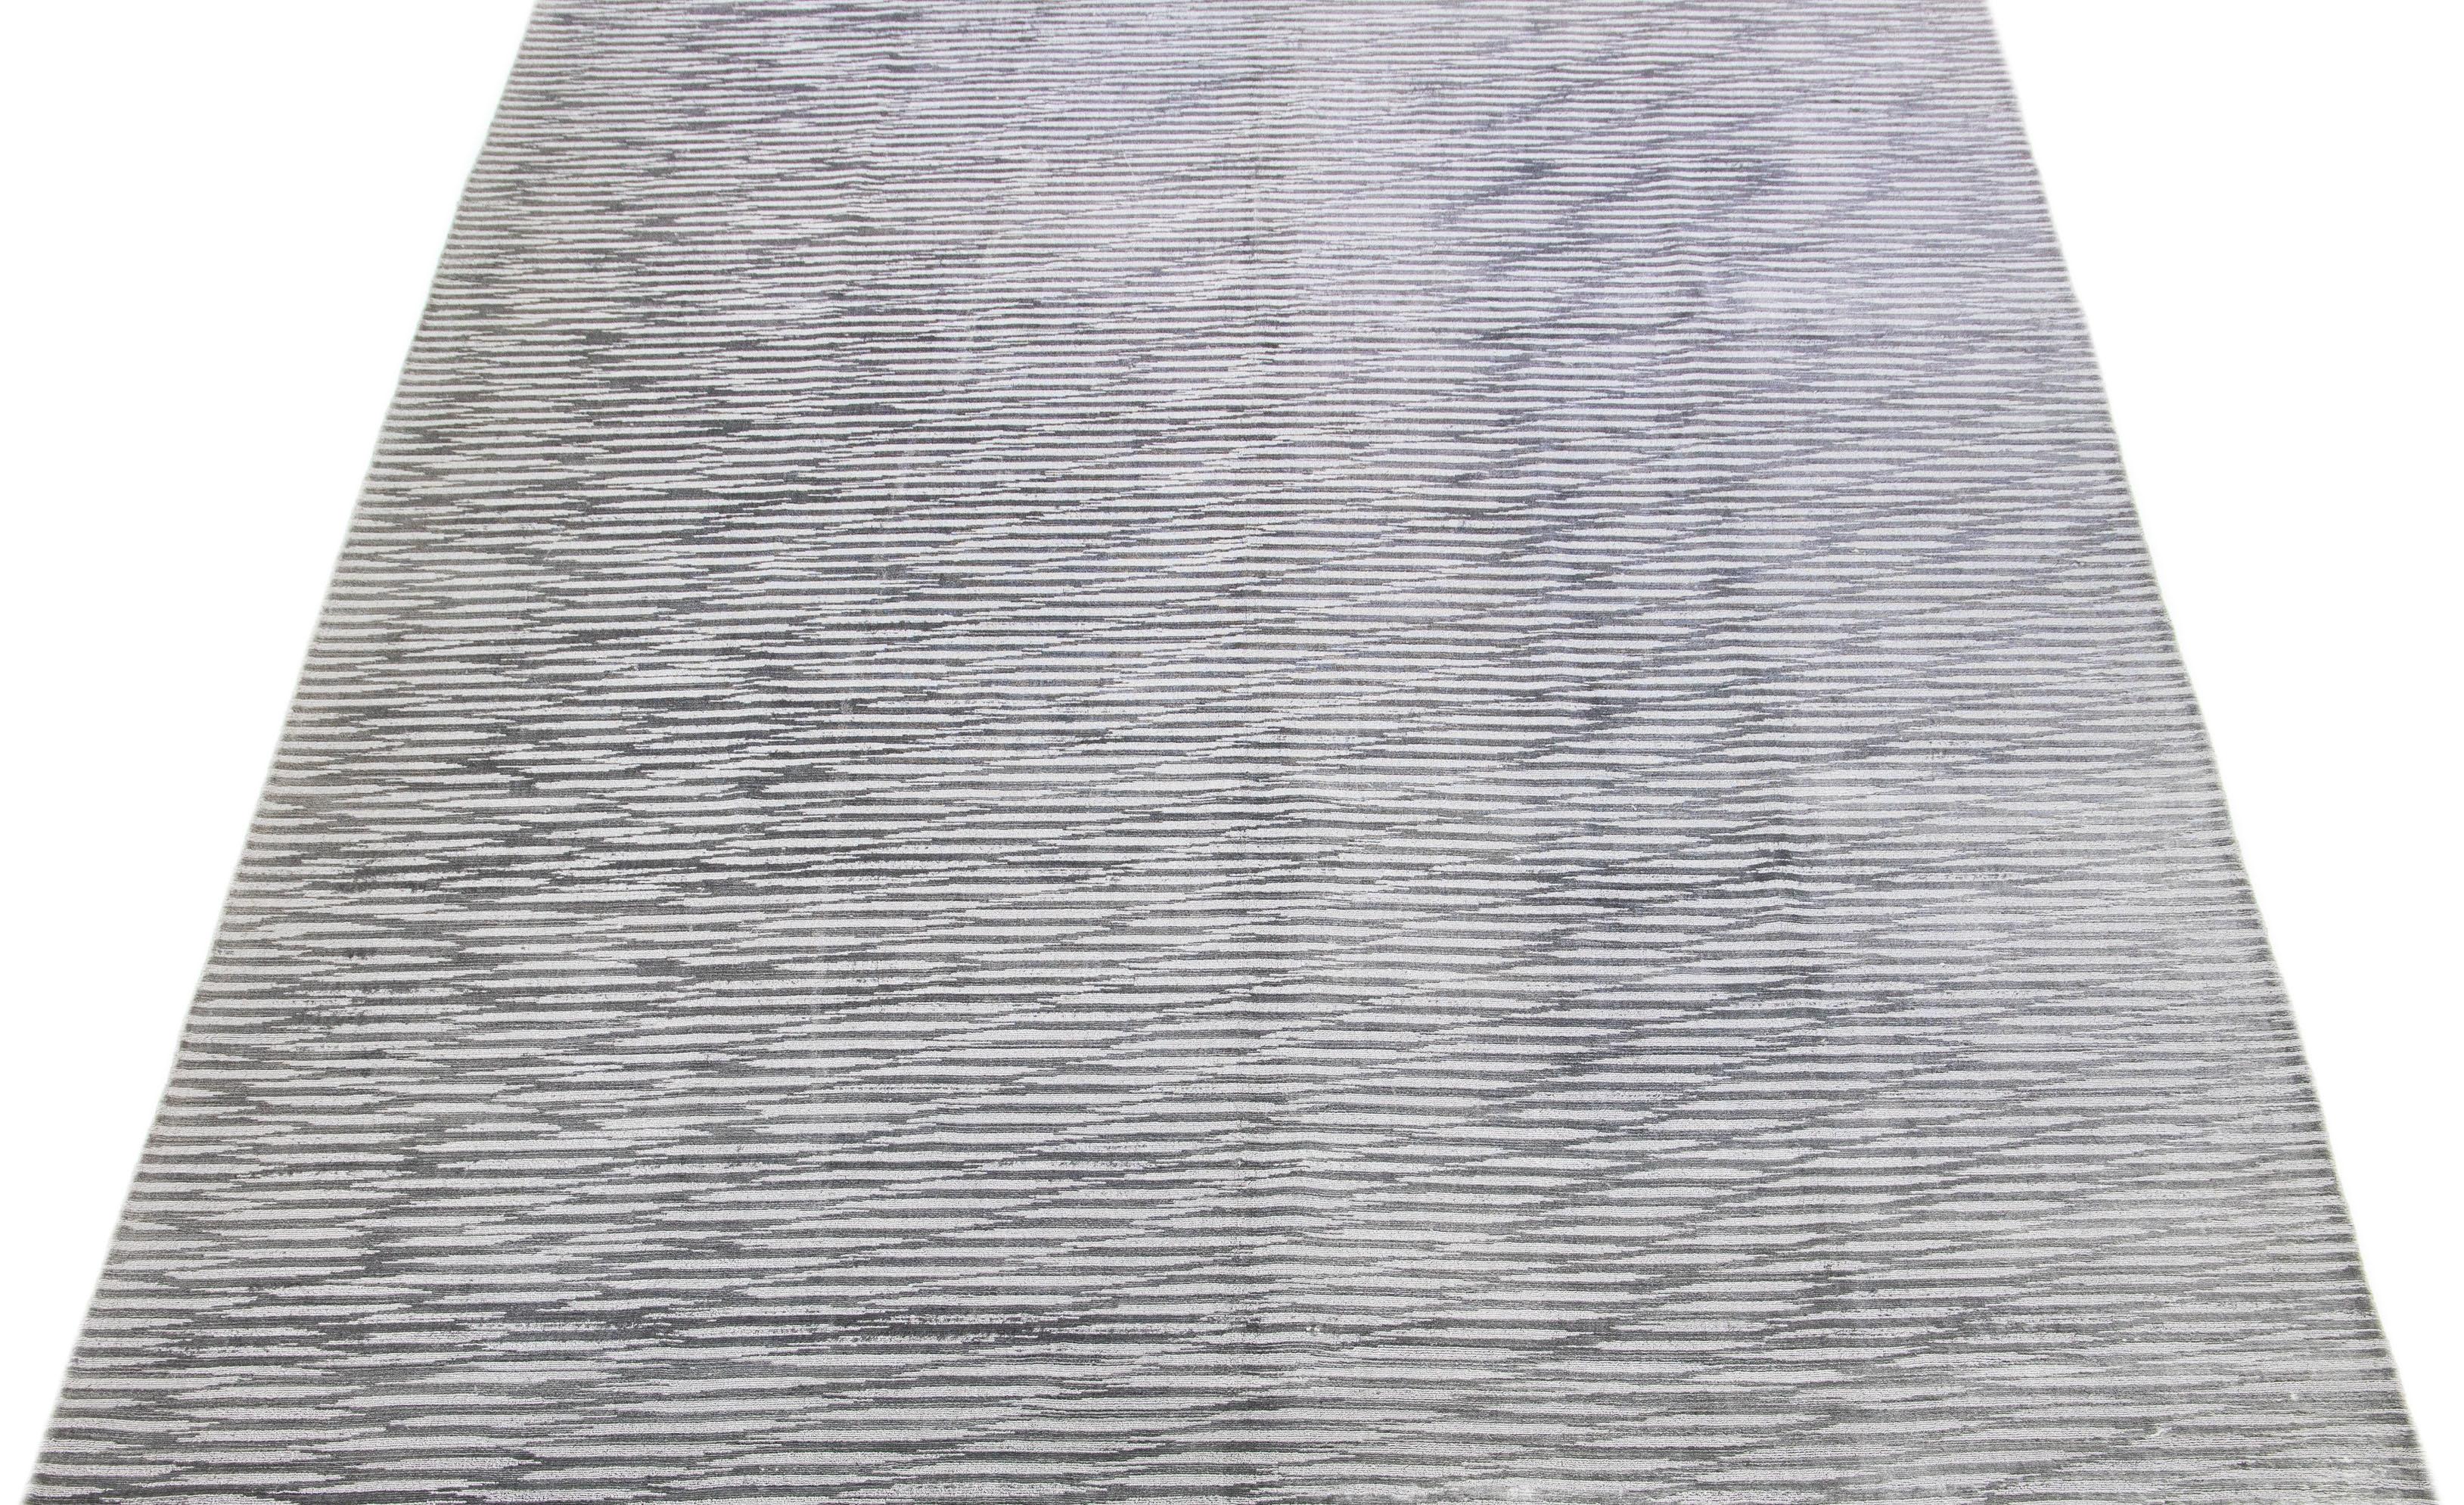 Meticulously crafted by hand using a blend of silk and wool, this exquisite contemporary rug showcases a stunning gray foundation perfectly accentuated by an alluring Stripe design in Silver shades.

This rug measures 9' x 12'.